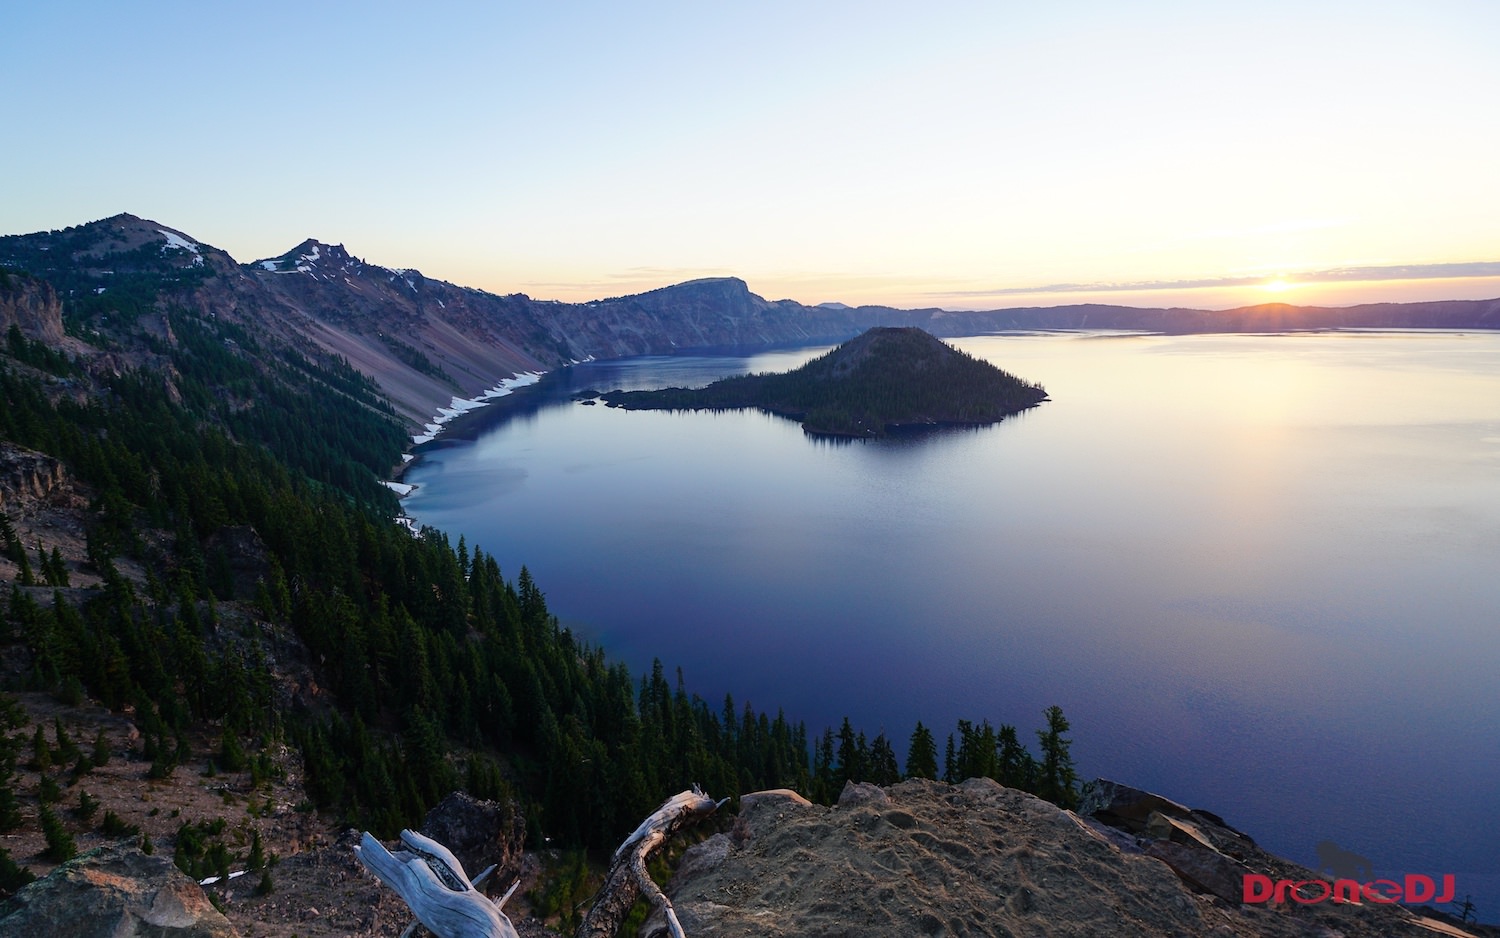 National Park Crater Lake will step up no-drone zone enforcement